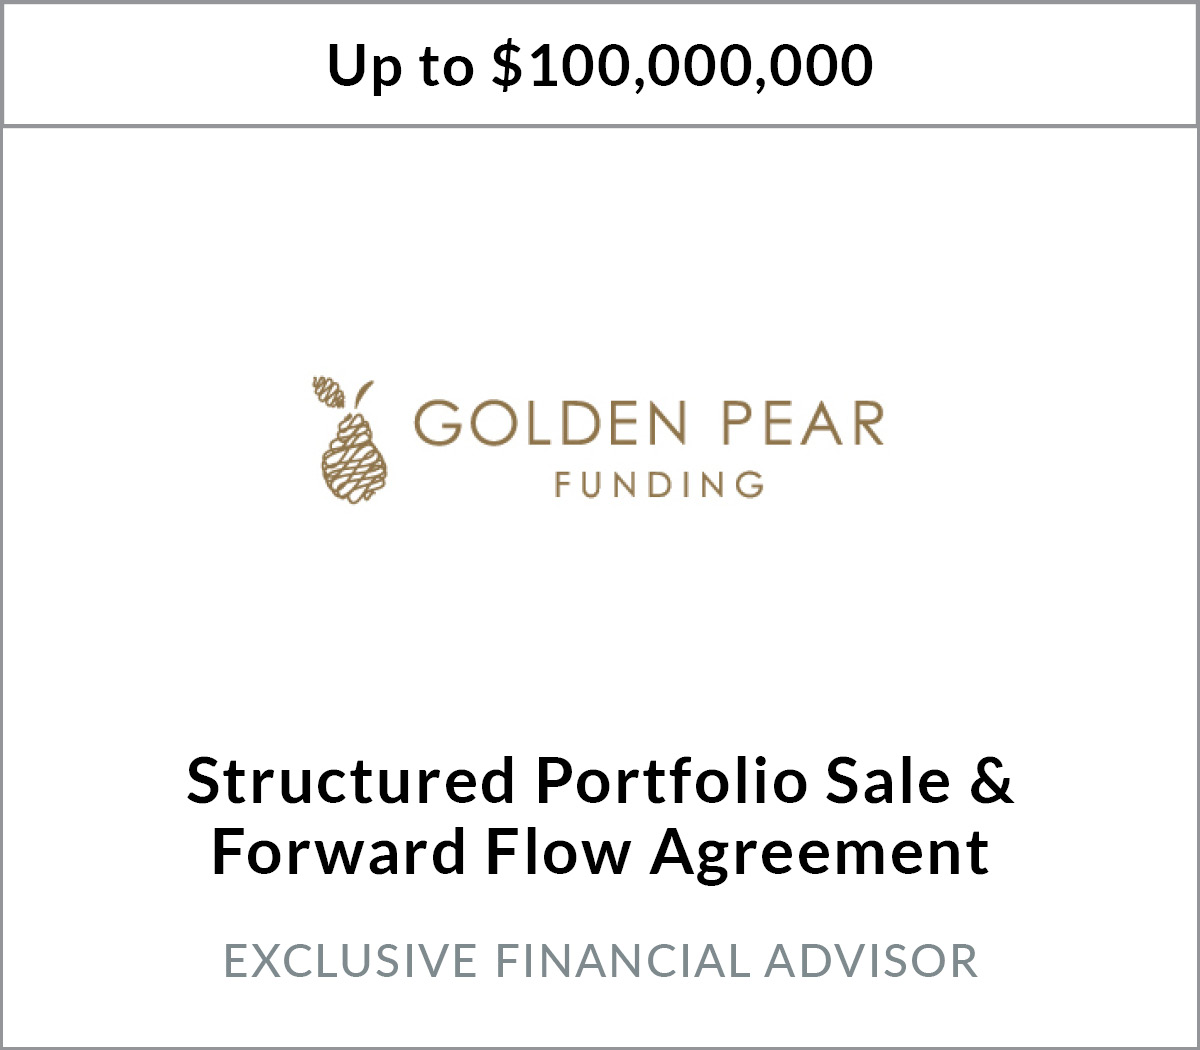 Golden Pear Funding, LLC Closes $100 Million Structured Portfolio Sale and Forward Flow Agreement